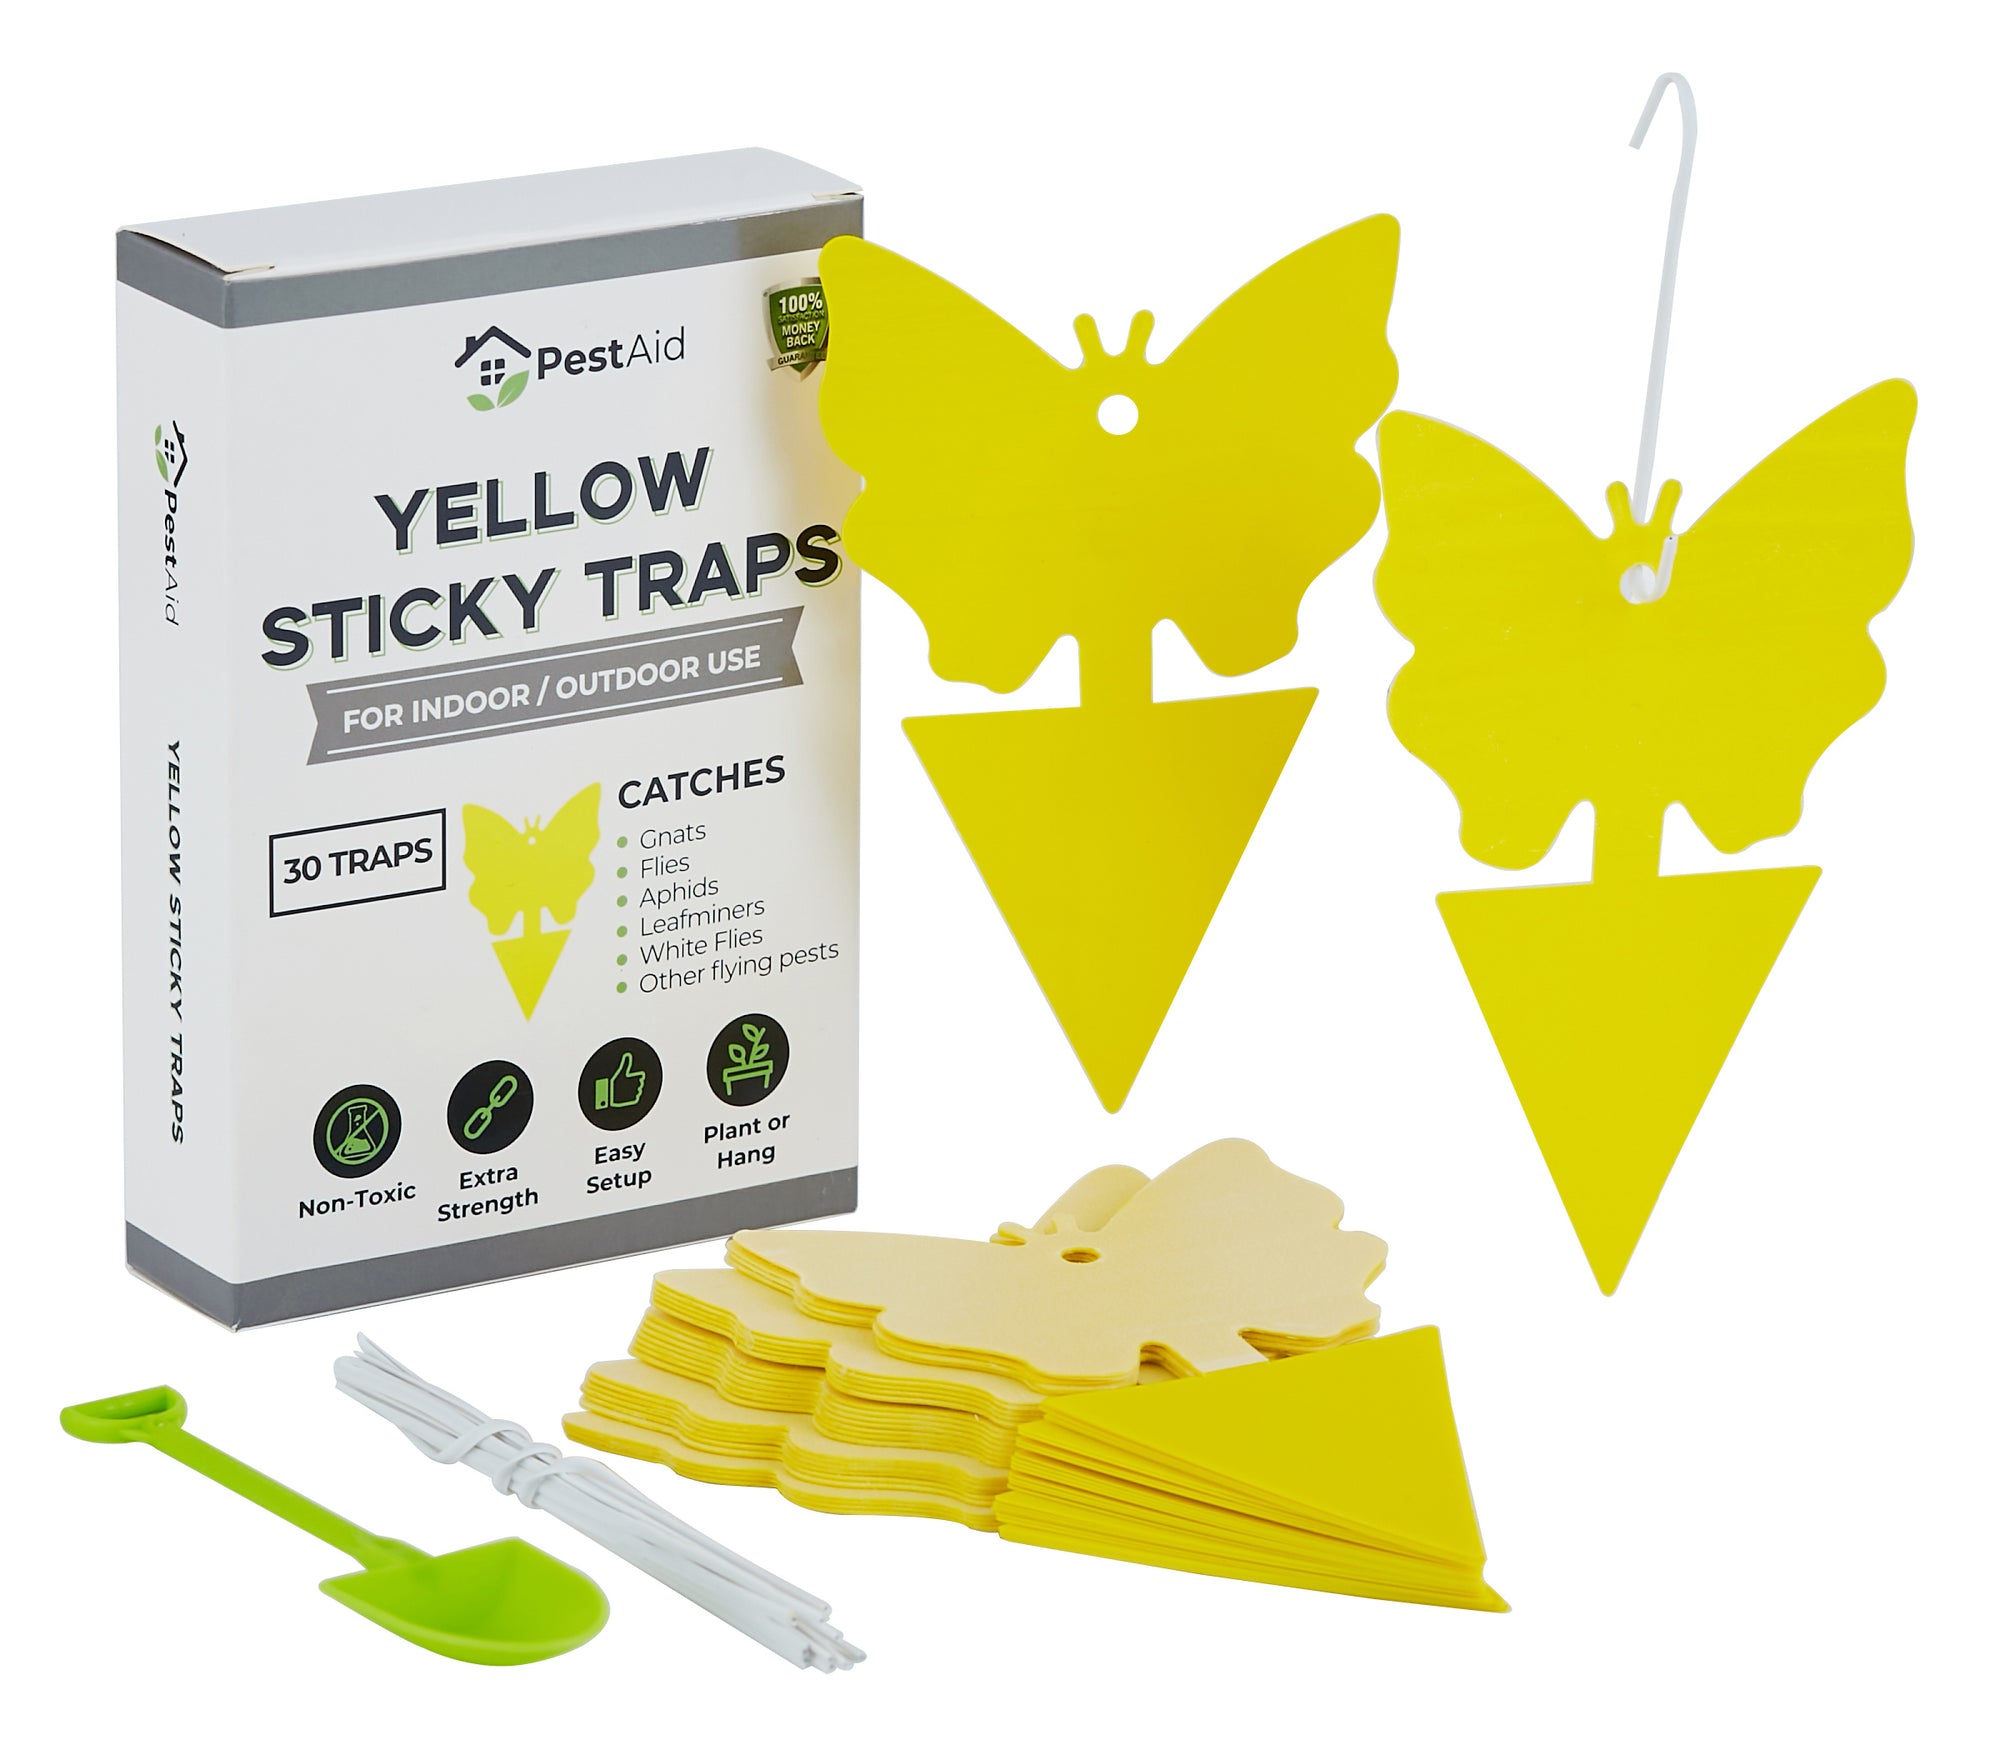 What are sticky bug traps? How effective are sticky bug traps?